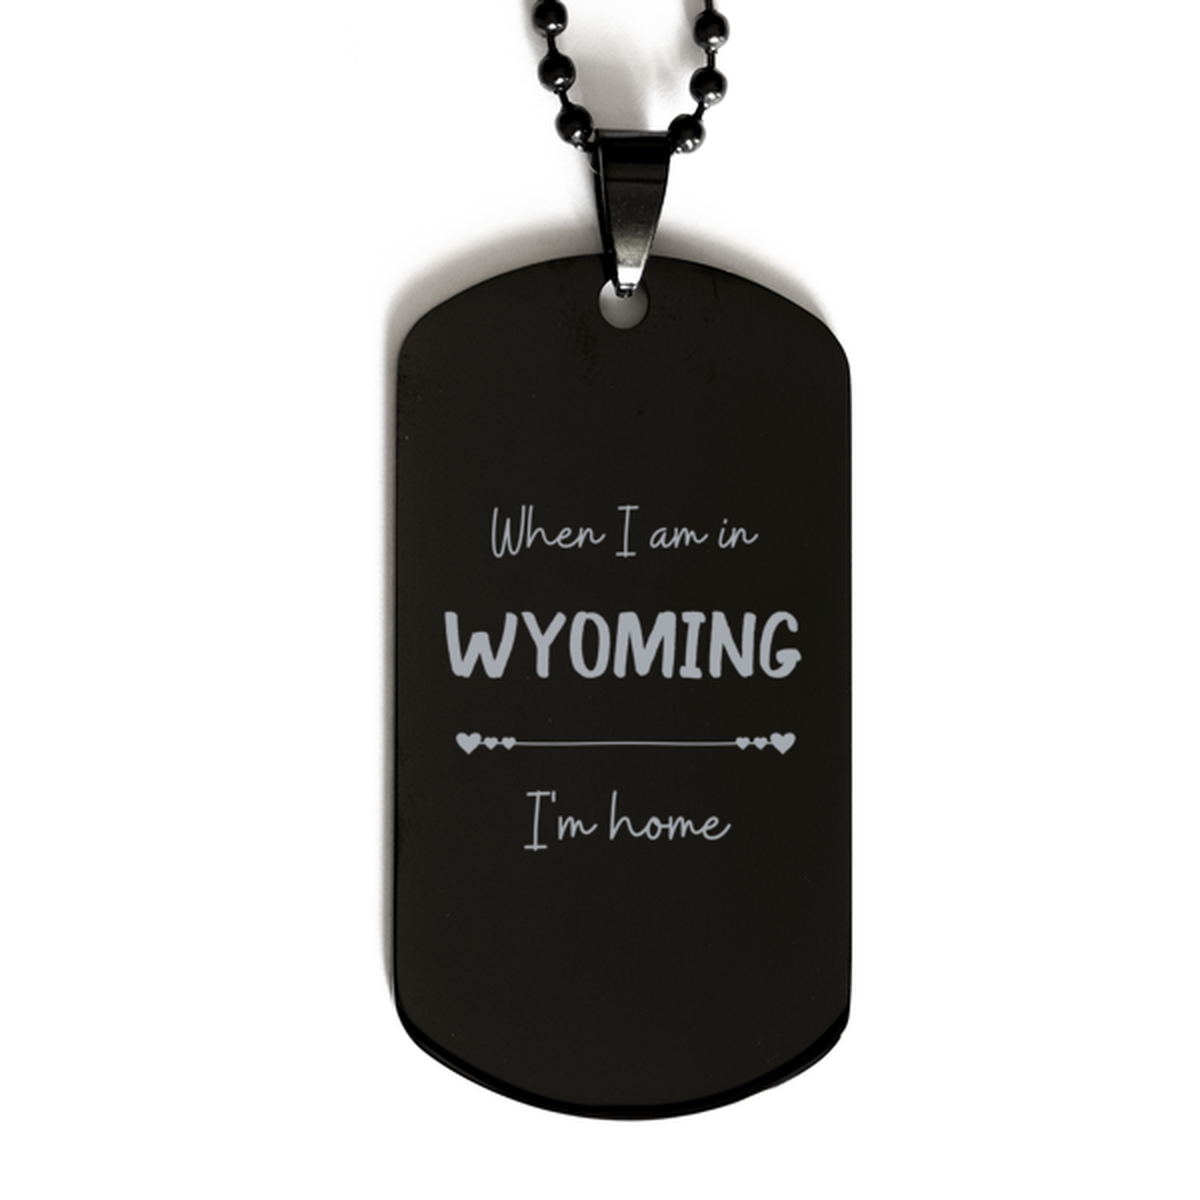 When I am in Wyoming I'm home Black Dog Tag, Cheap Gifts For Wyoming, State Wyoming Birthday Gifts for Friends Coworker